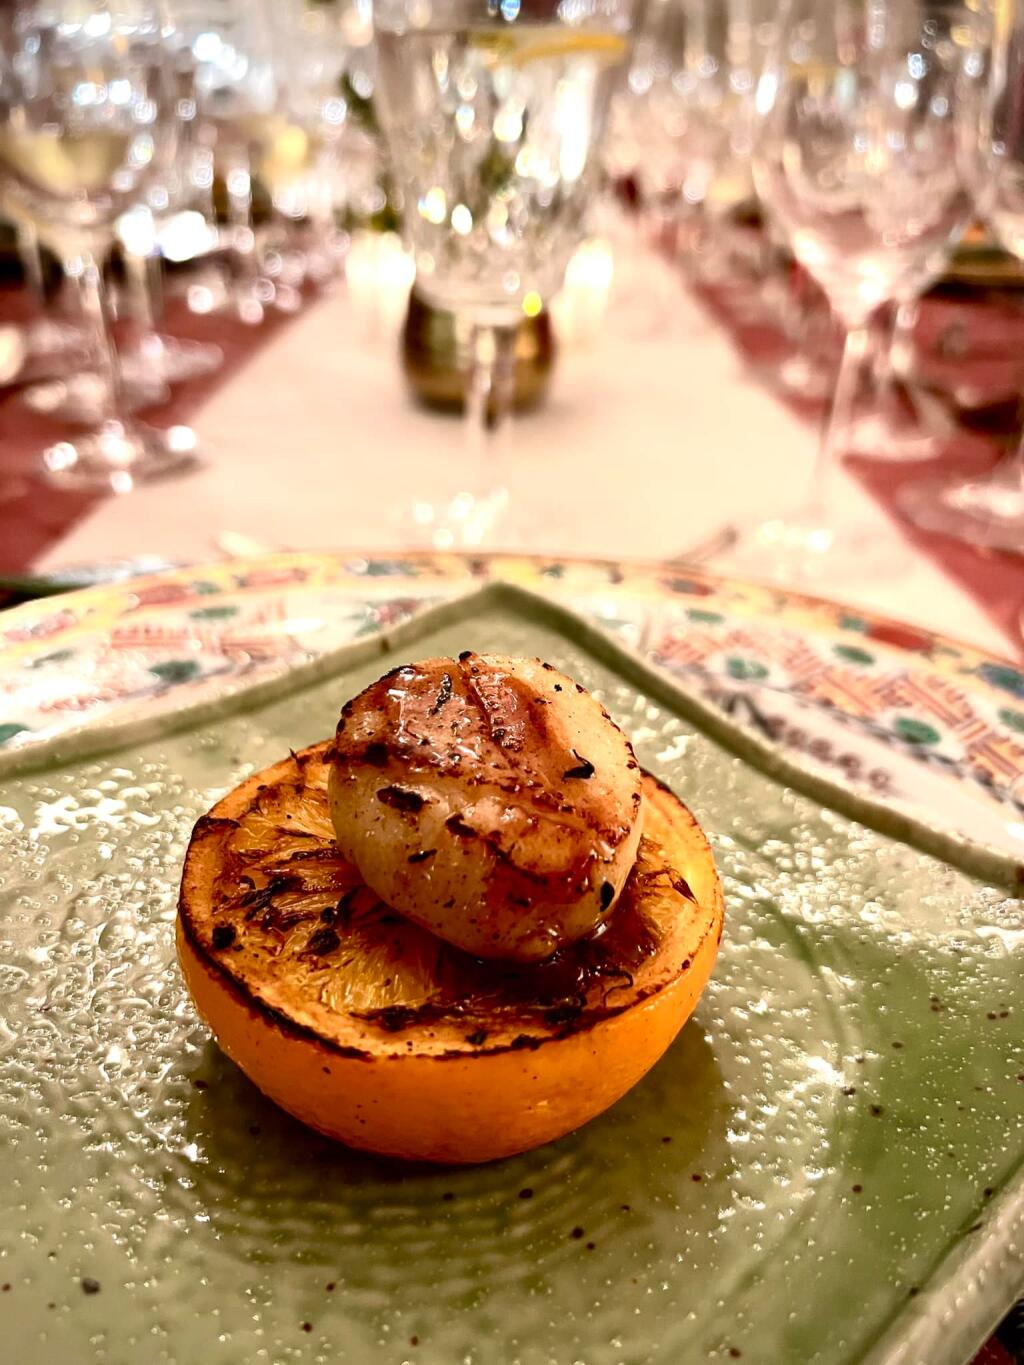 The table setting shines in the background of one dish - the seared scallop atop a grilled orange half - served during a recent reunion dinner as part of a Lunar New Year’s Celebration. (COURTESY OF LANCE LEW)